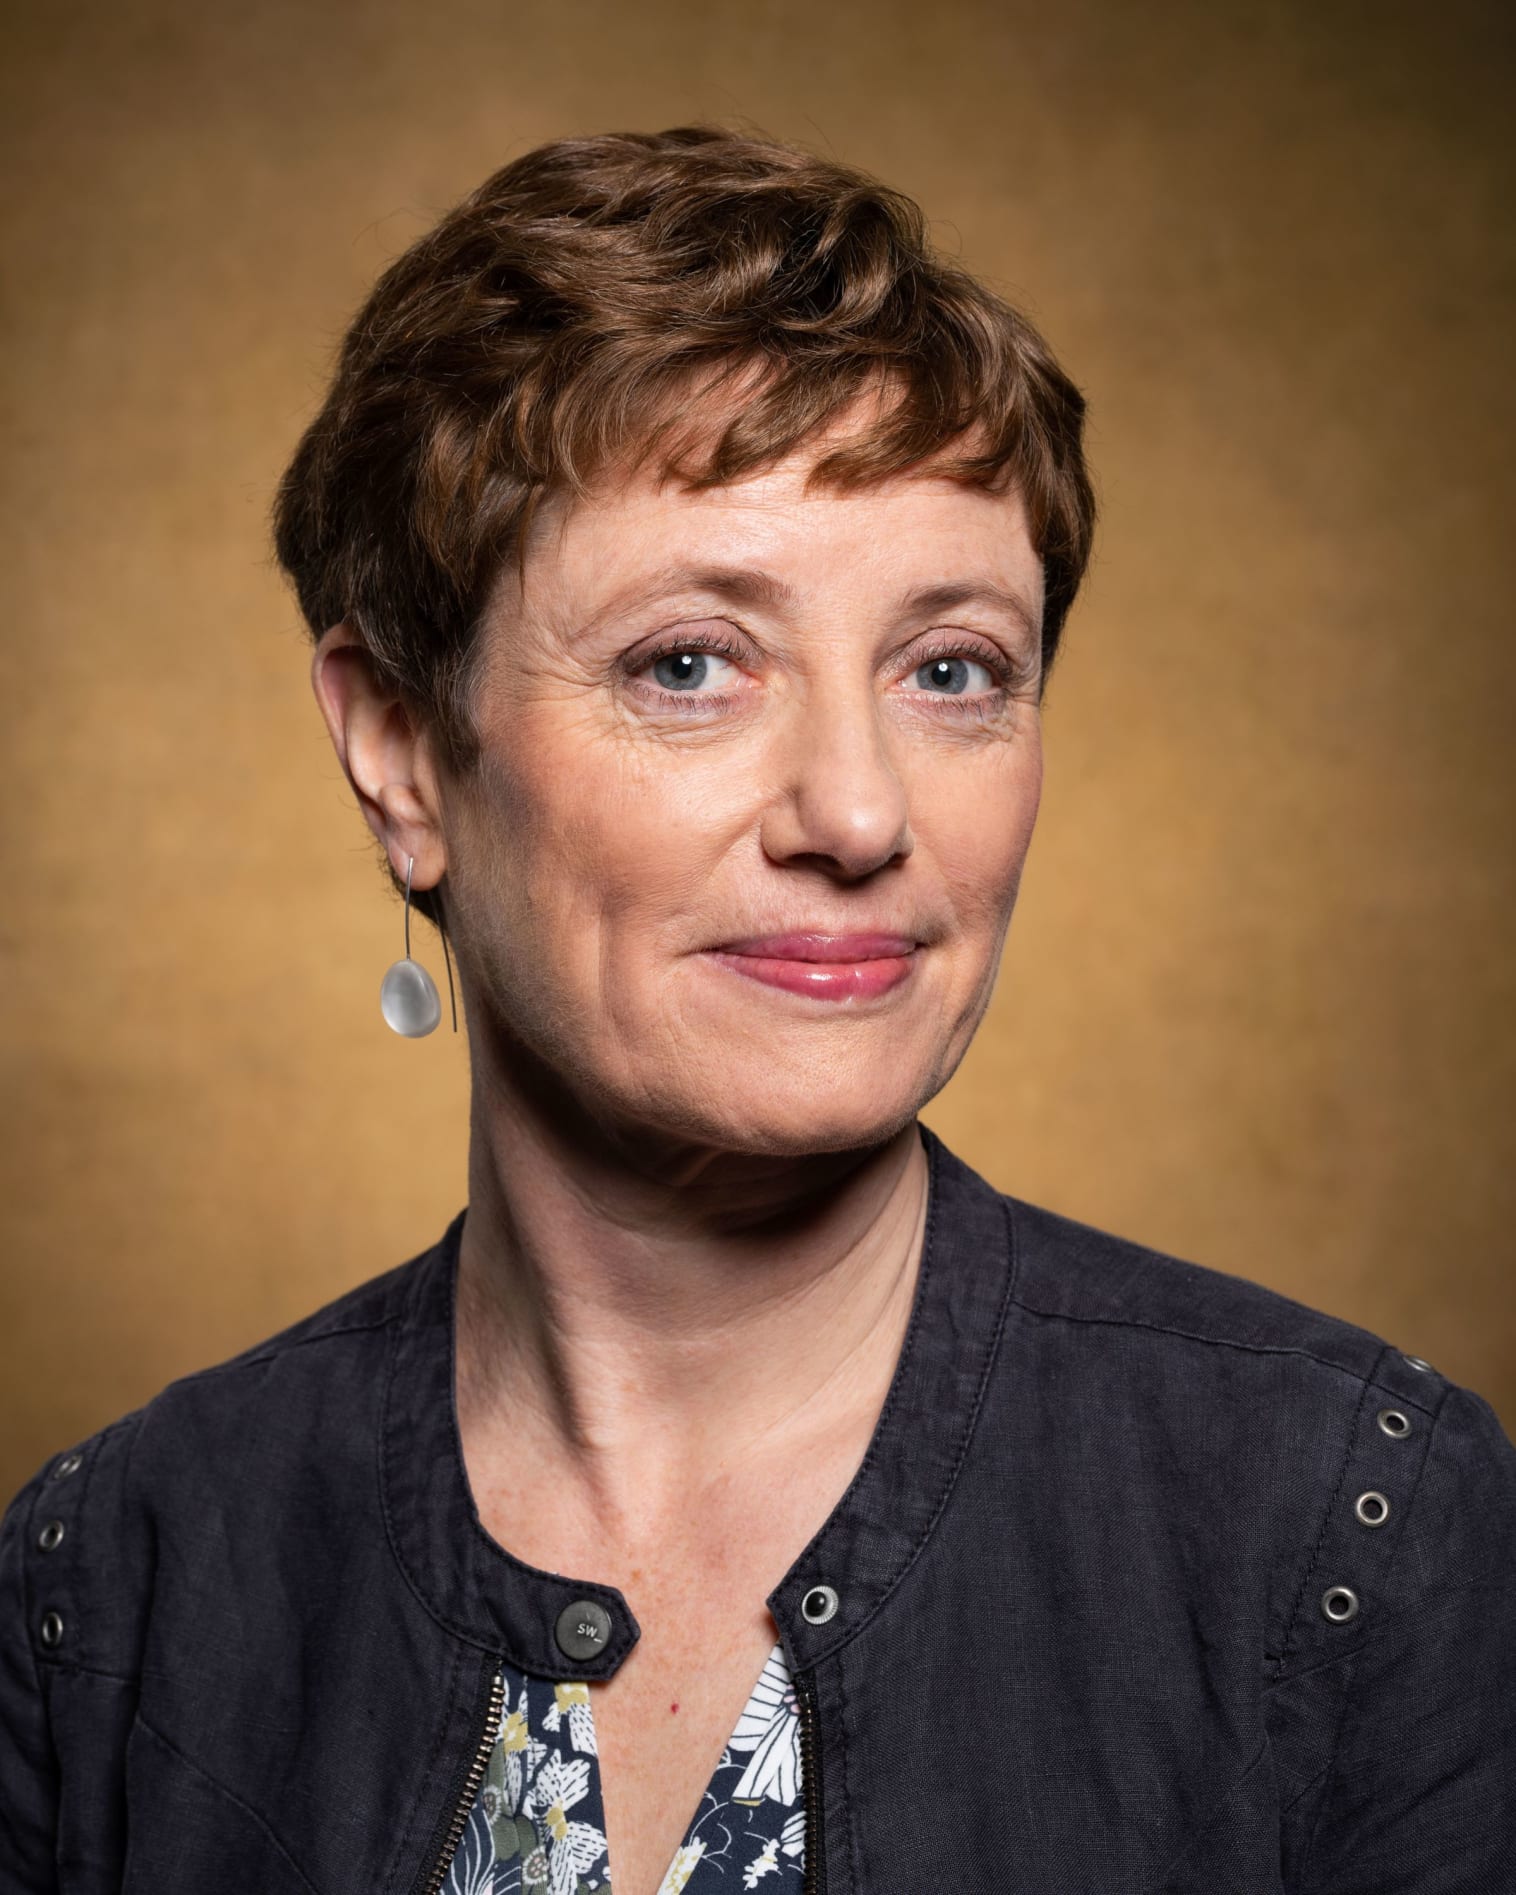 This is a photograph of Rebecca Lunn. She has short, brown hair, is wearing a navy jacket and pictured against a beige background.